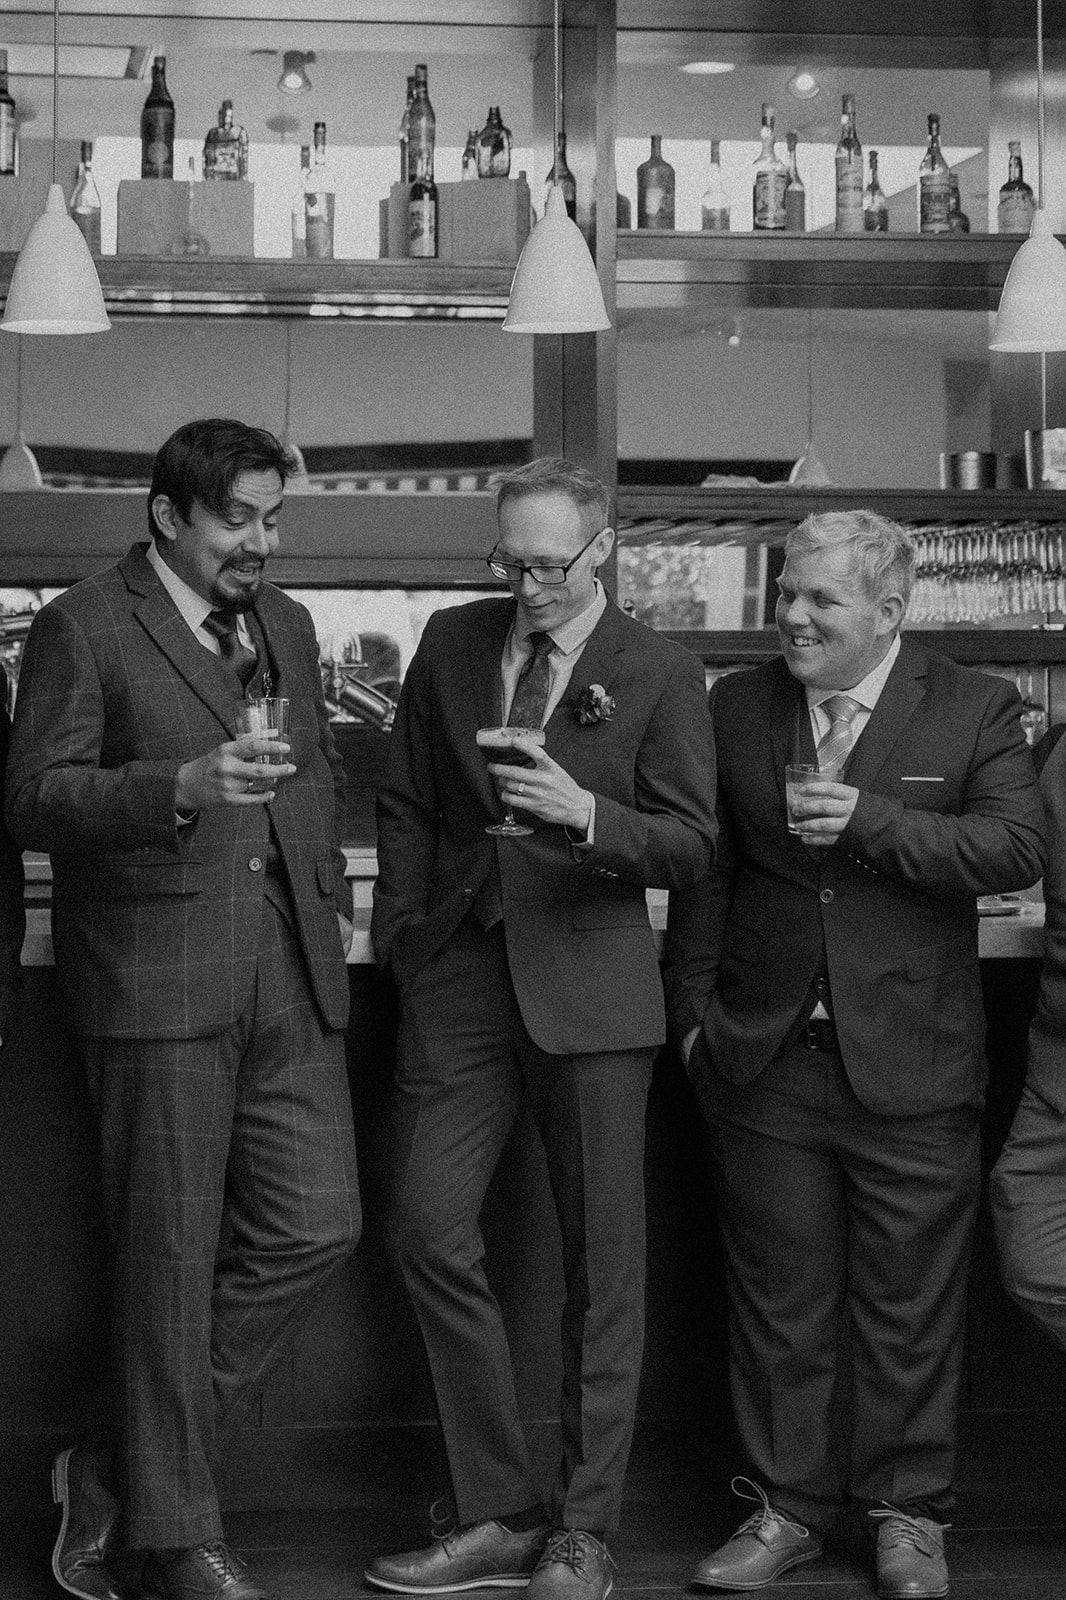 Three men in suits laughing and holding drinks at a bar.